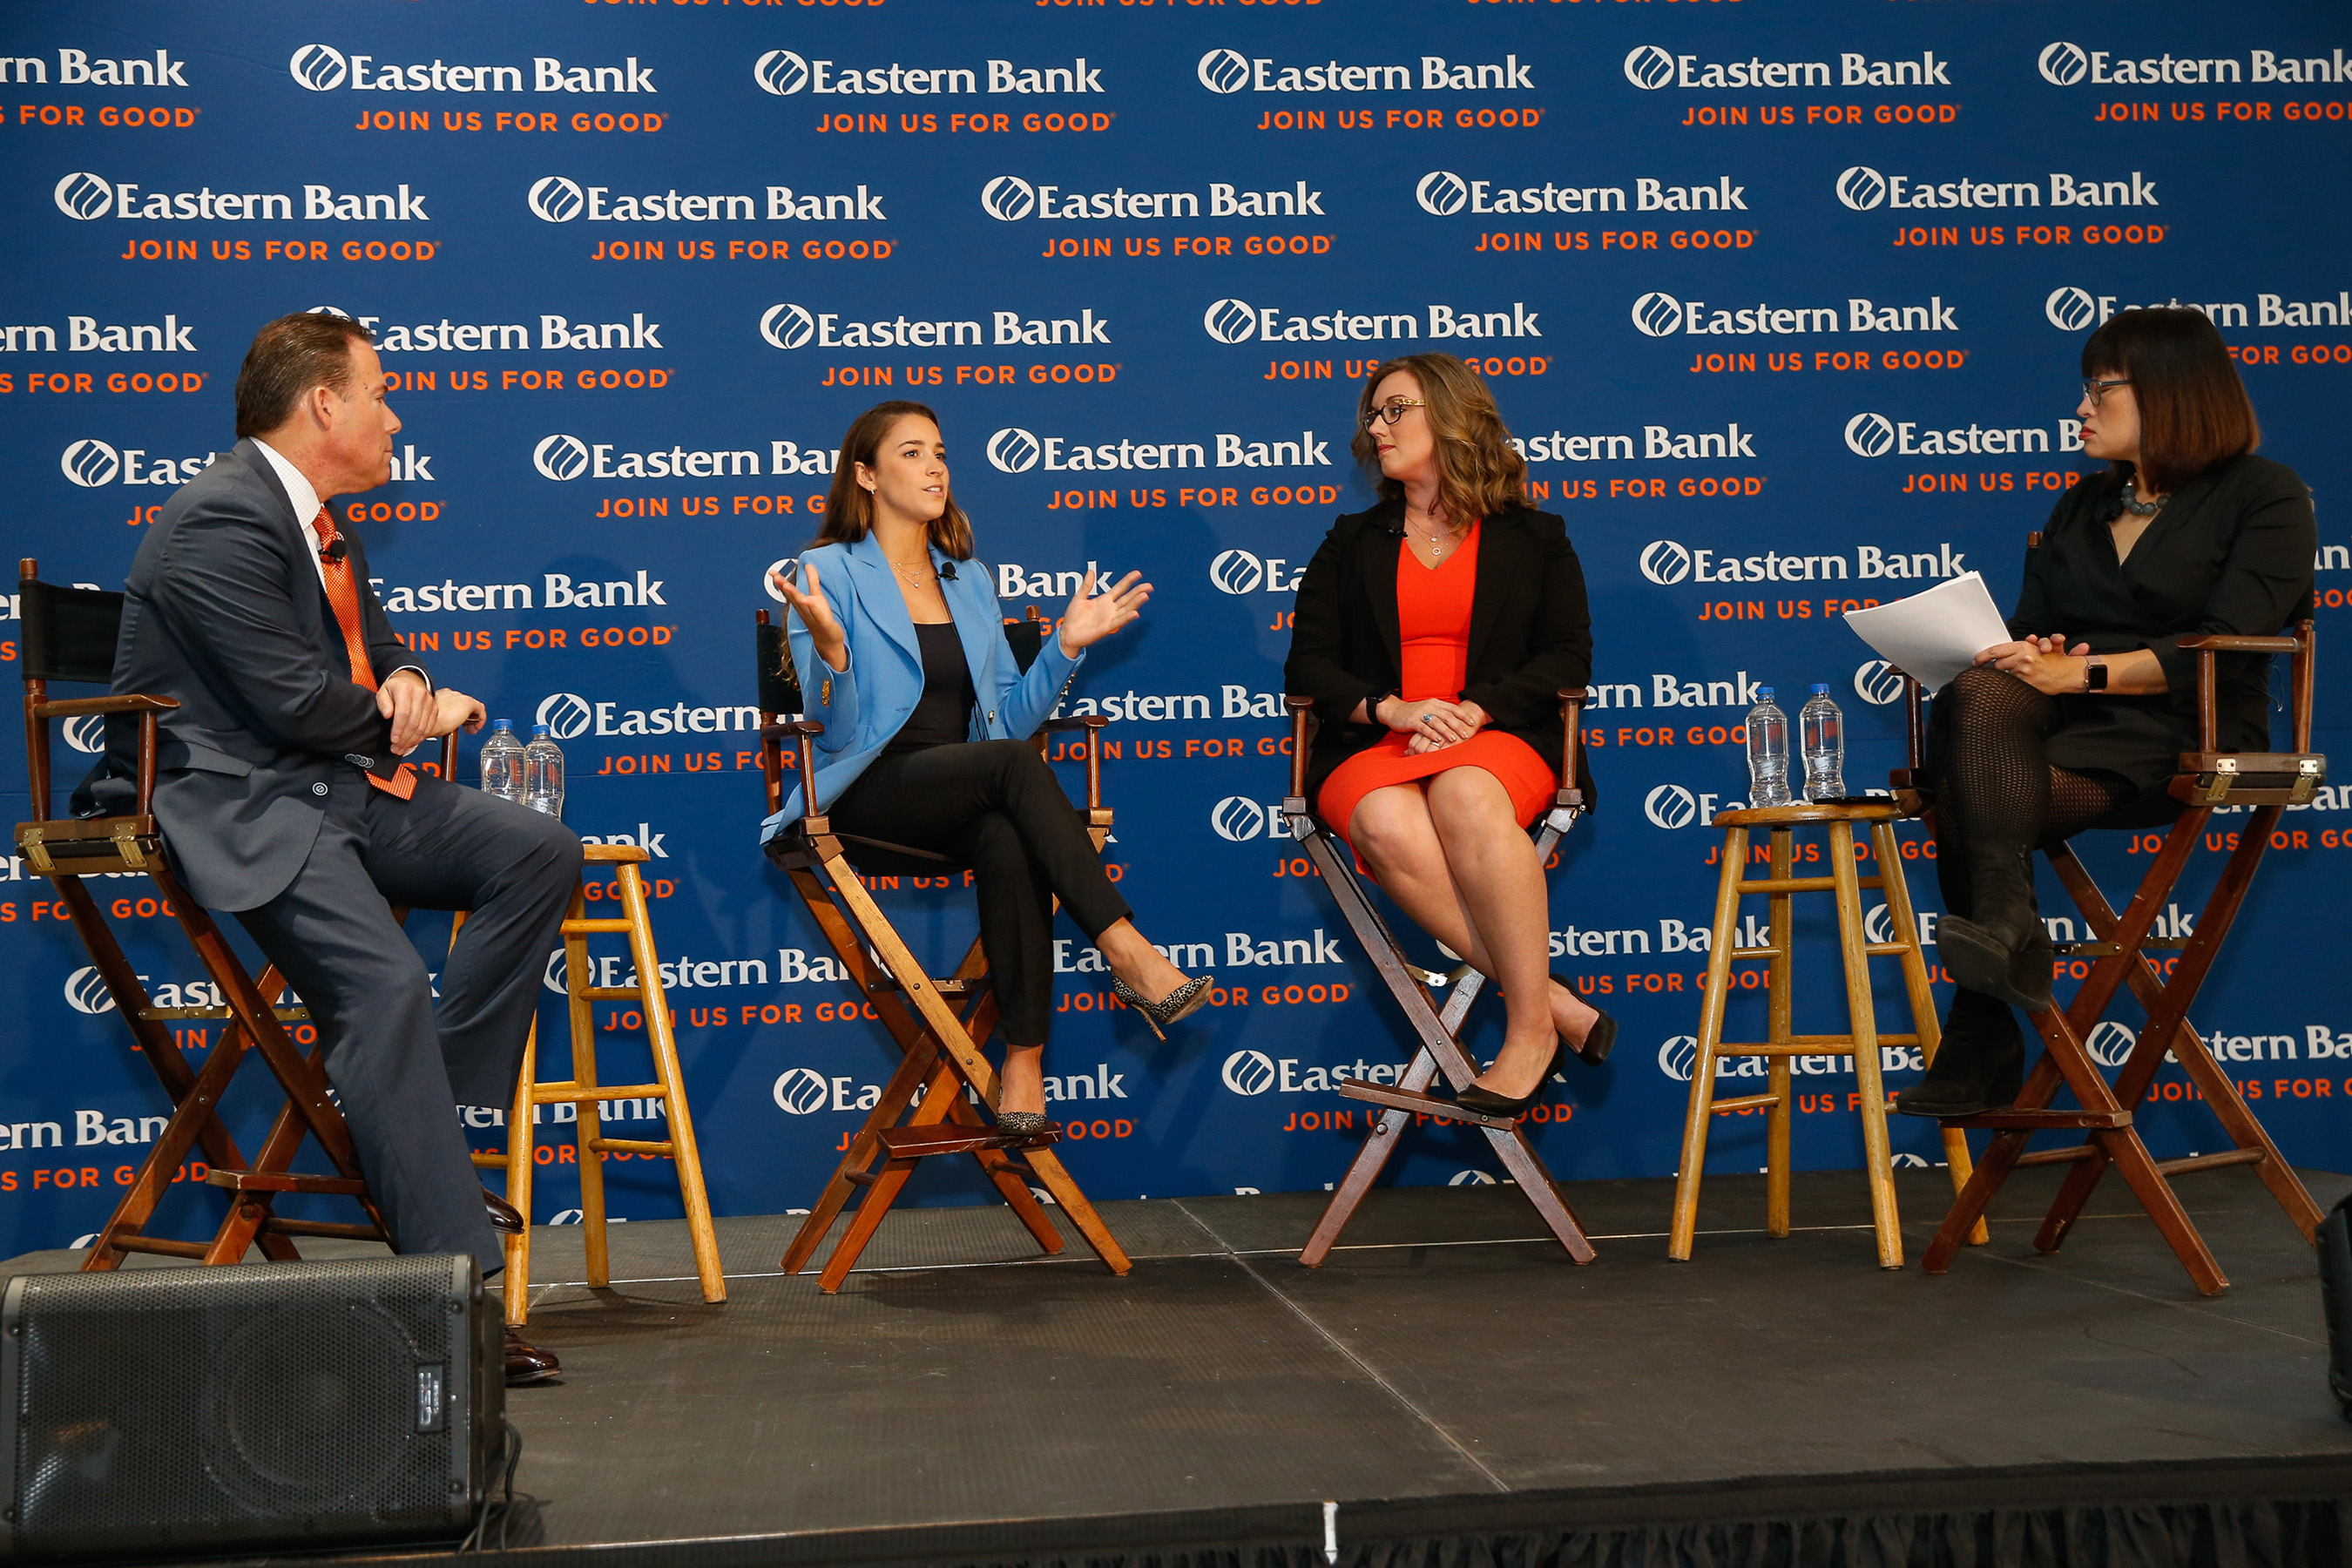 Bob Rivers, Aly Raisman, Katelyn Brewer and Shirley Leung discuss child sexual abuse and prevention training during an event at Eastern Bank headquarters in Boston on October 16, 2018.